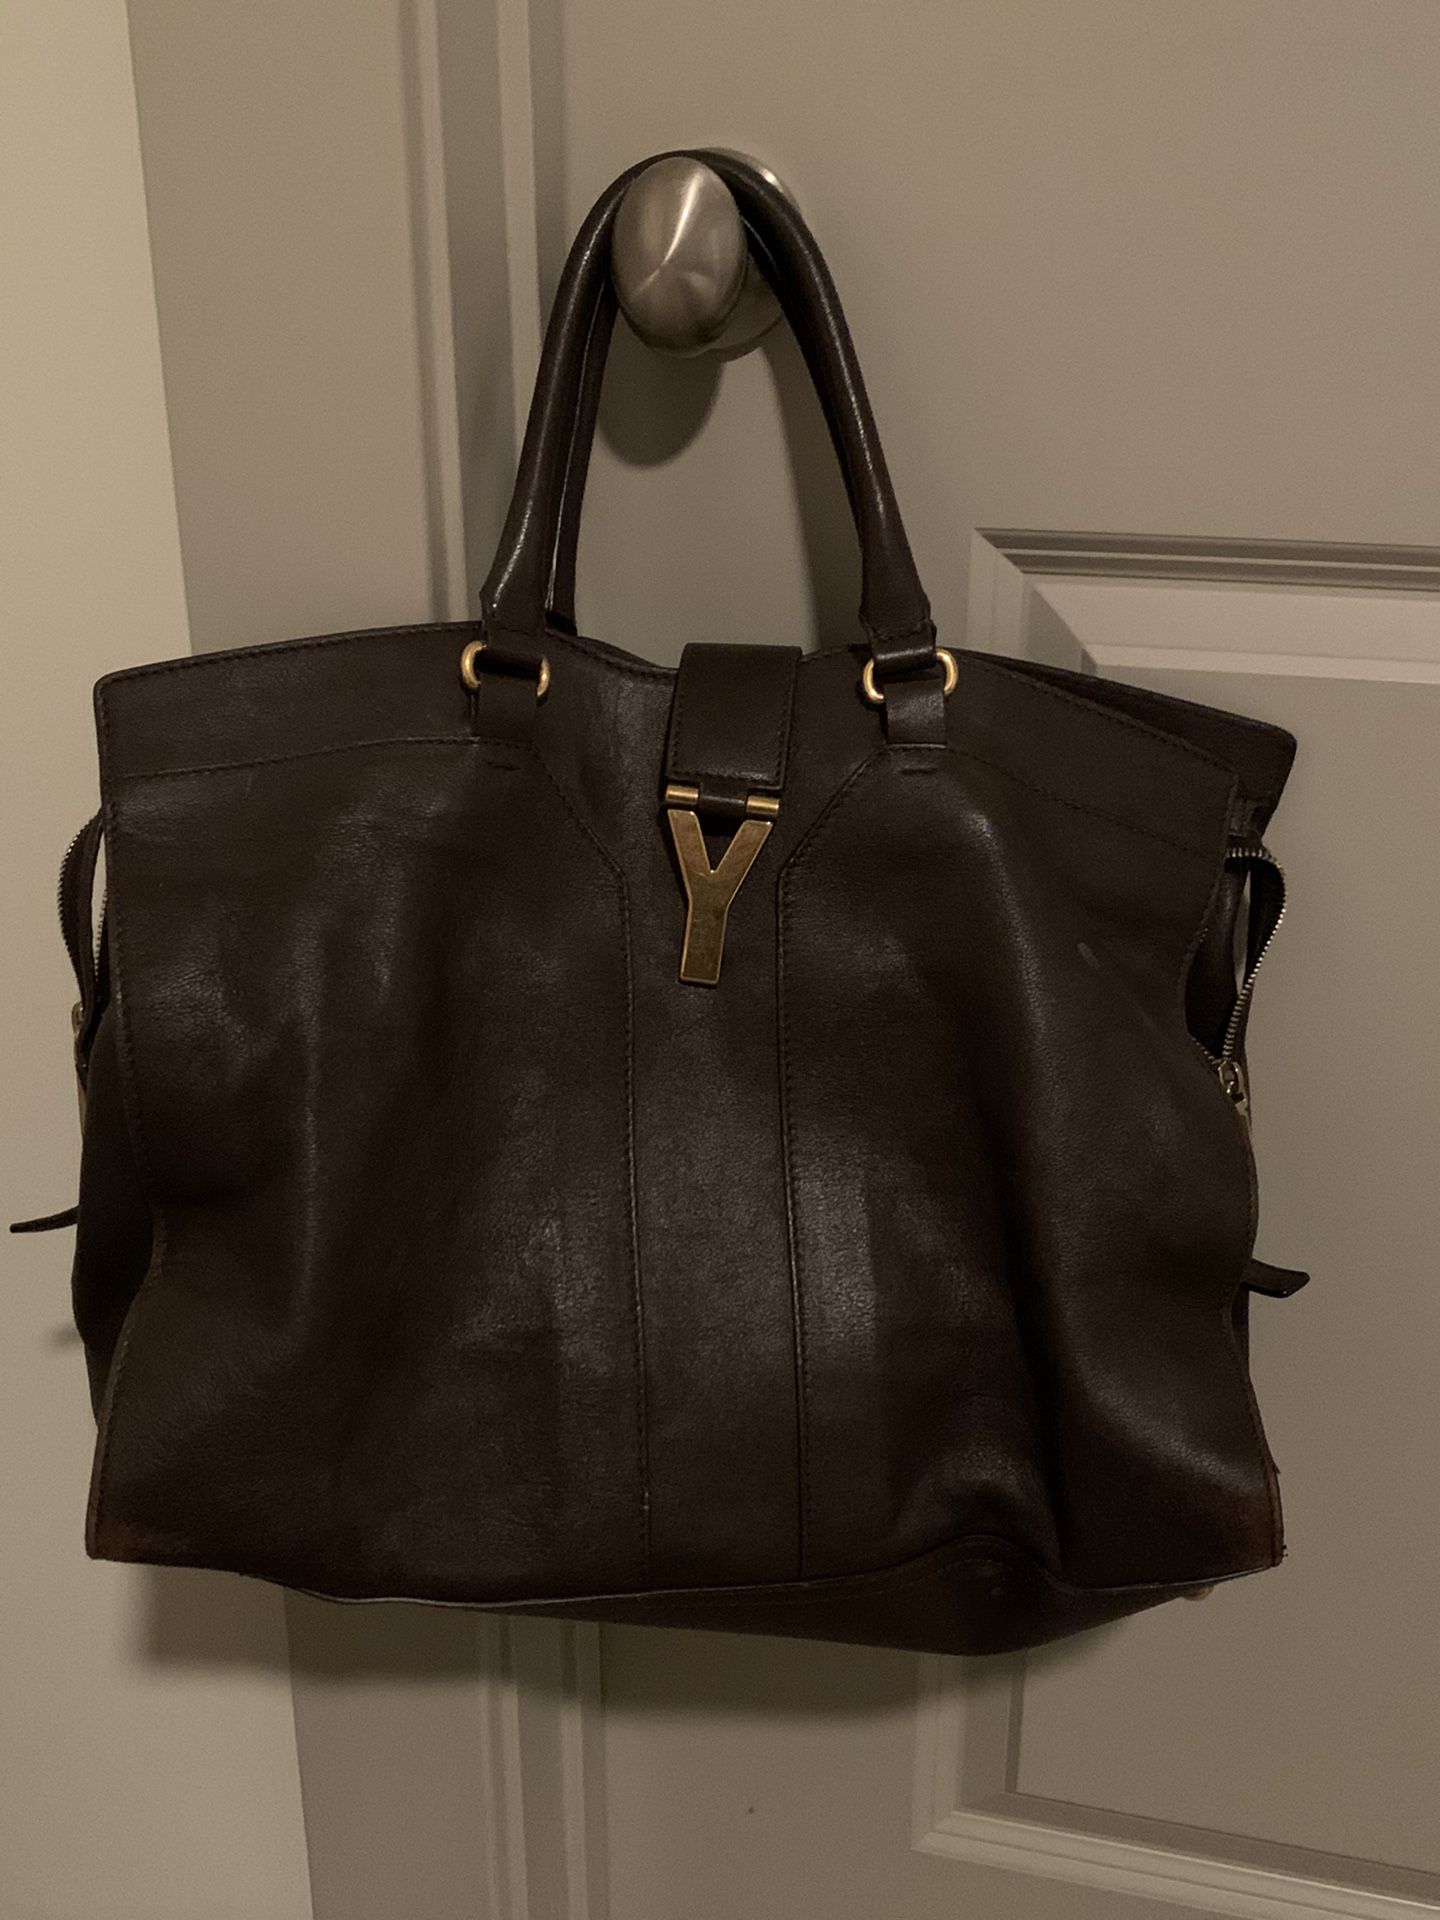 YSL authentic large cabas leather tote handbag